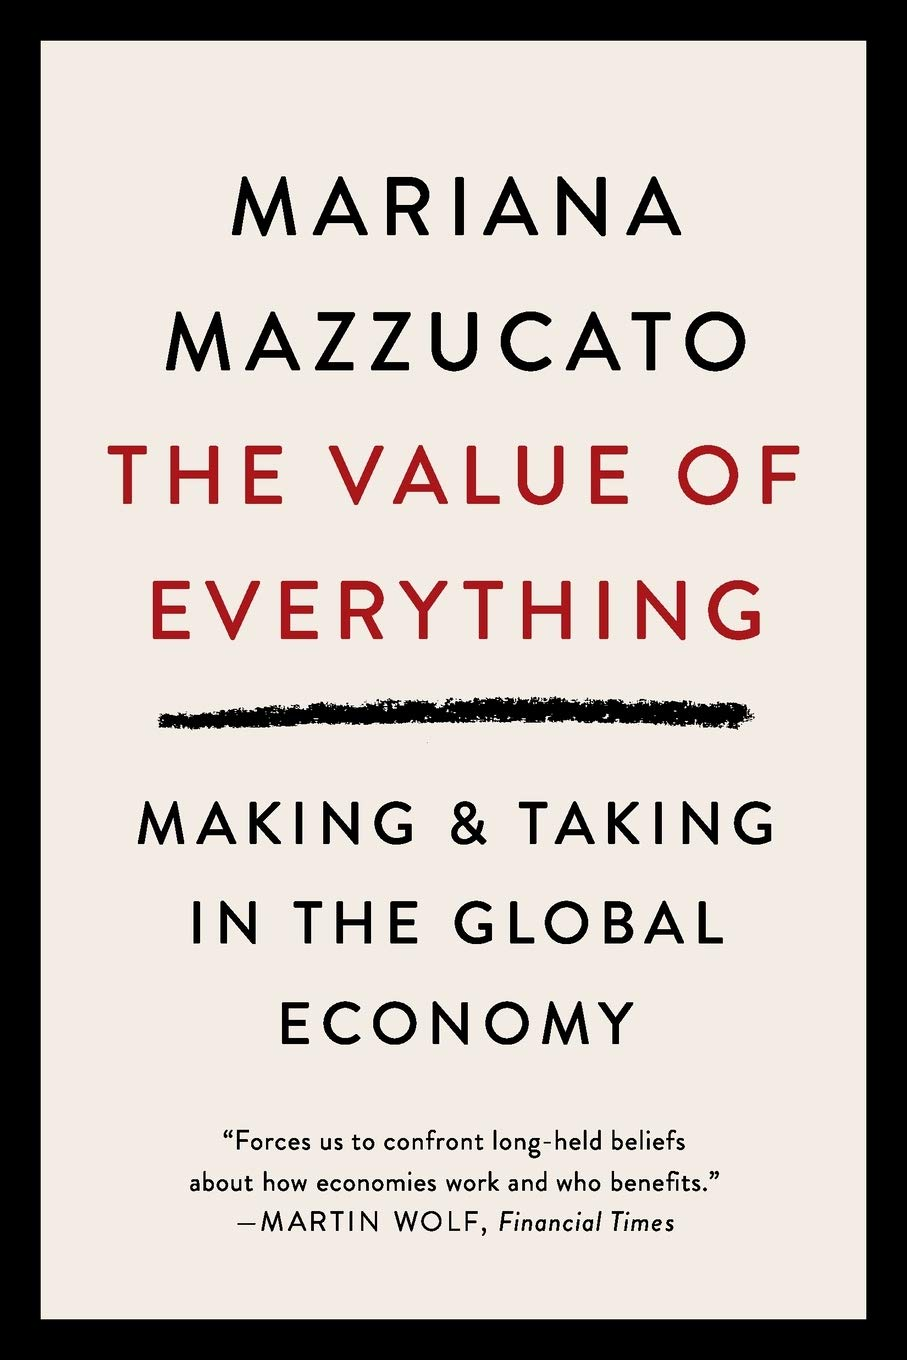 Mariana Mazzucato: Value of Everything (2019, Penguin Books, Limited)